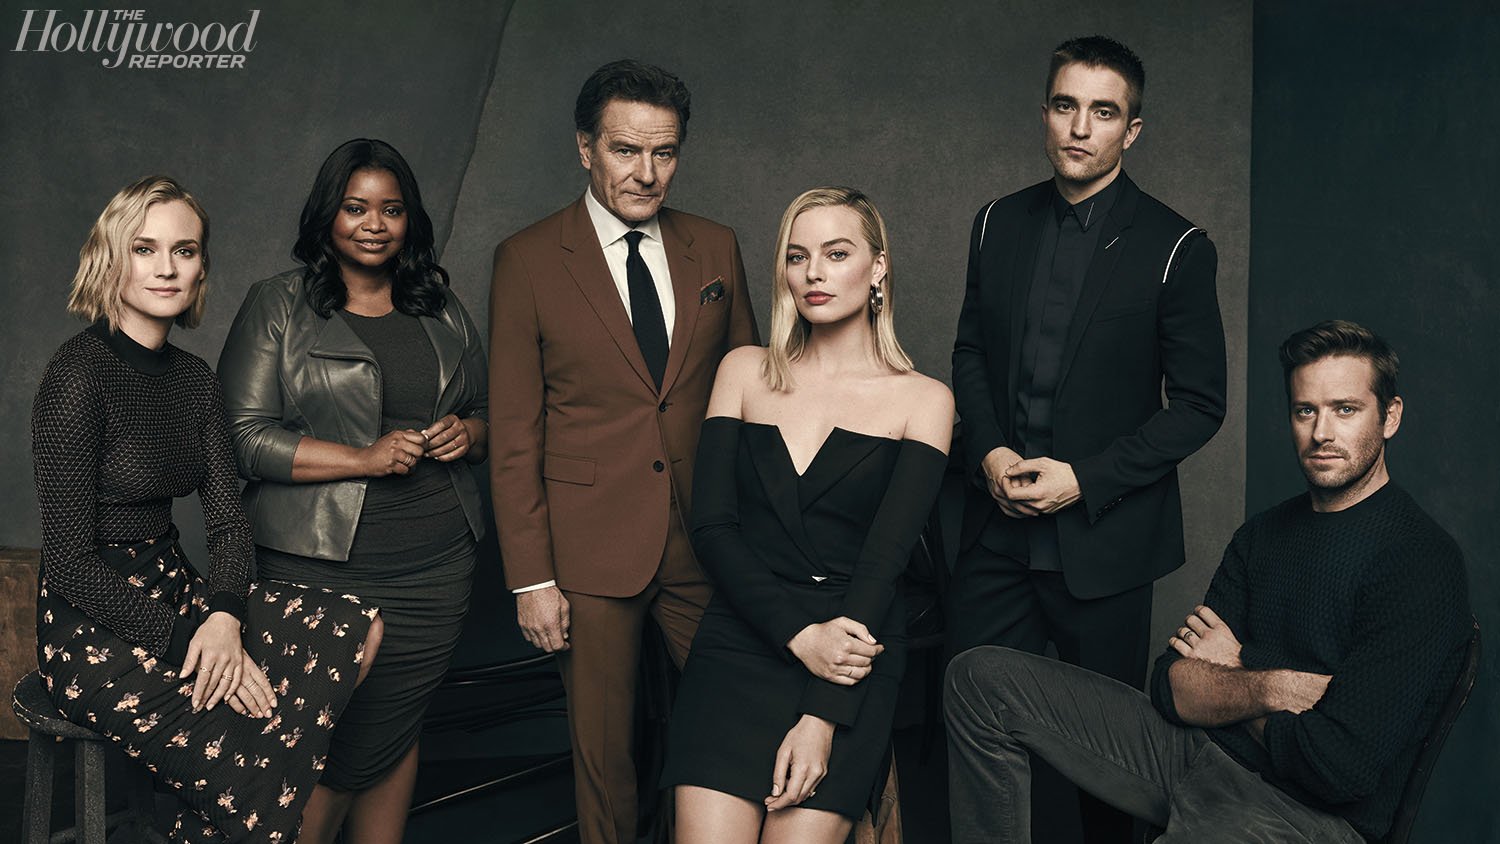 The Hollywood Reporter First Ever Live Roundtable